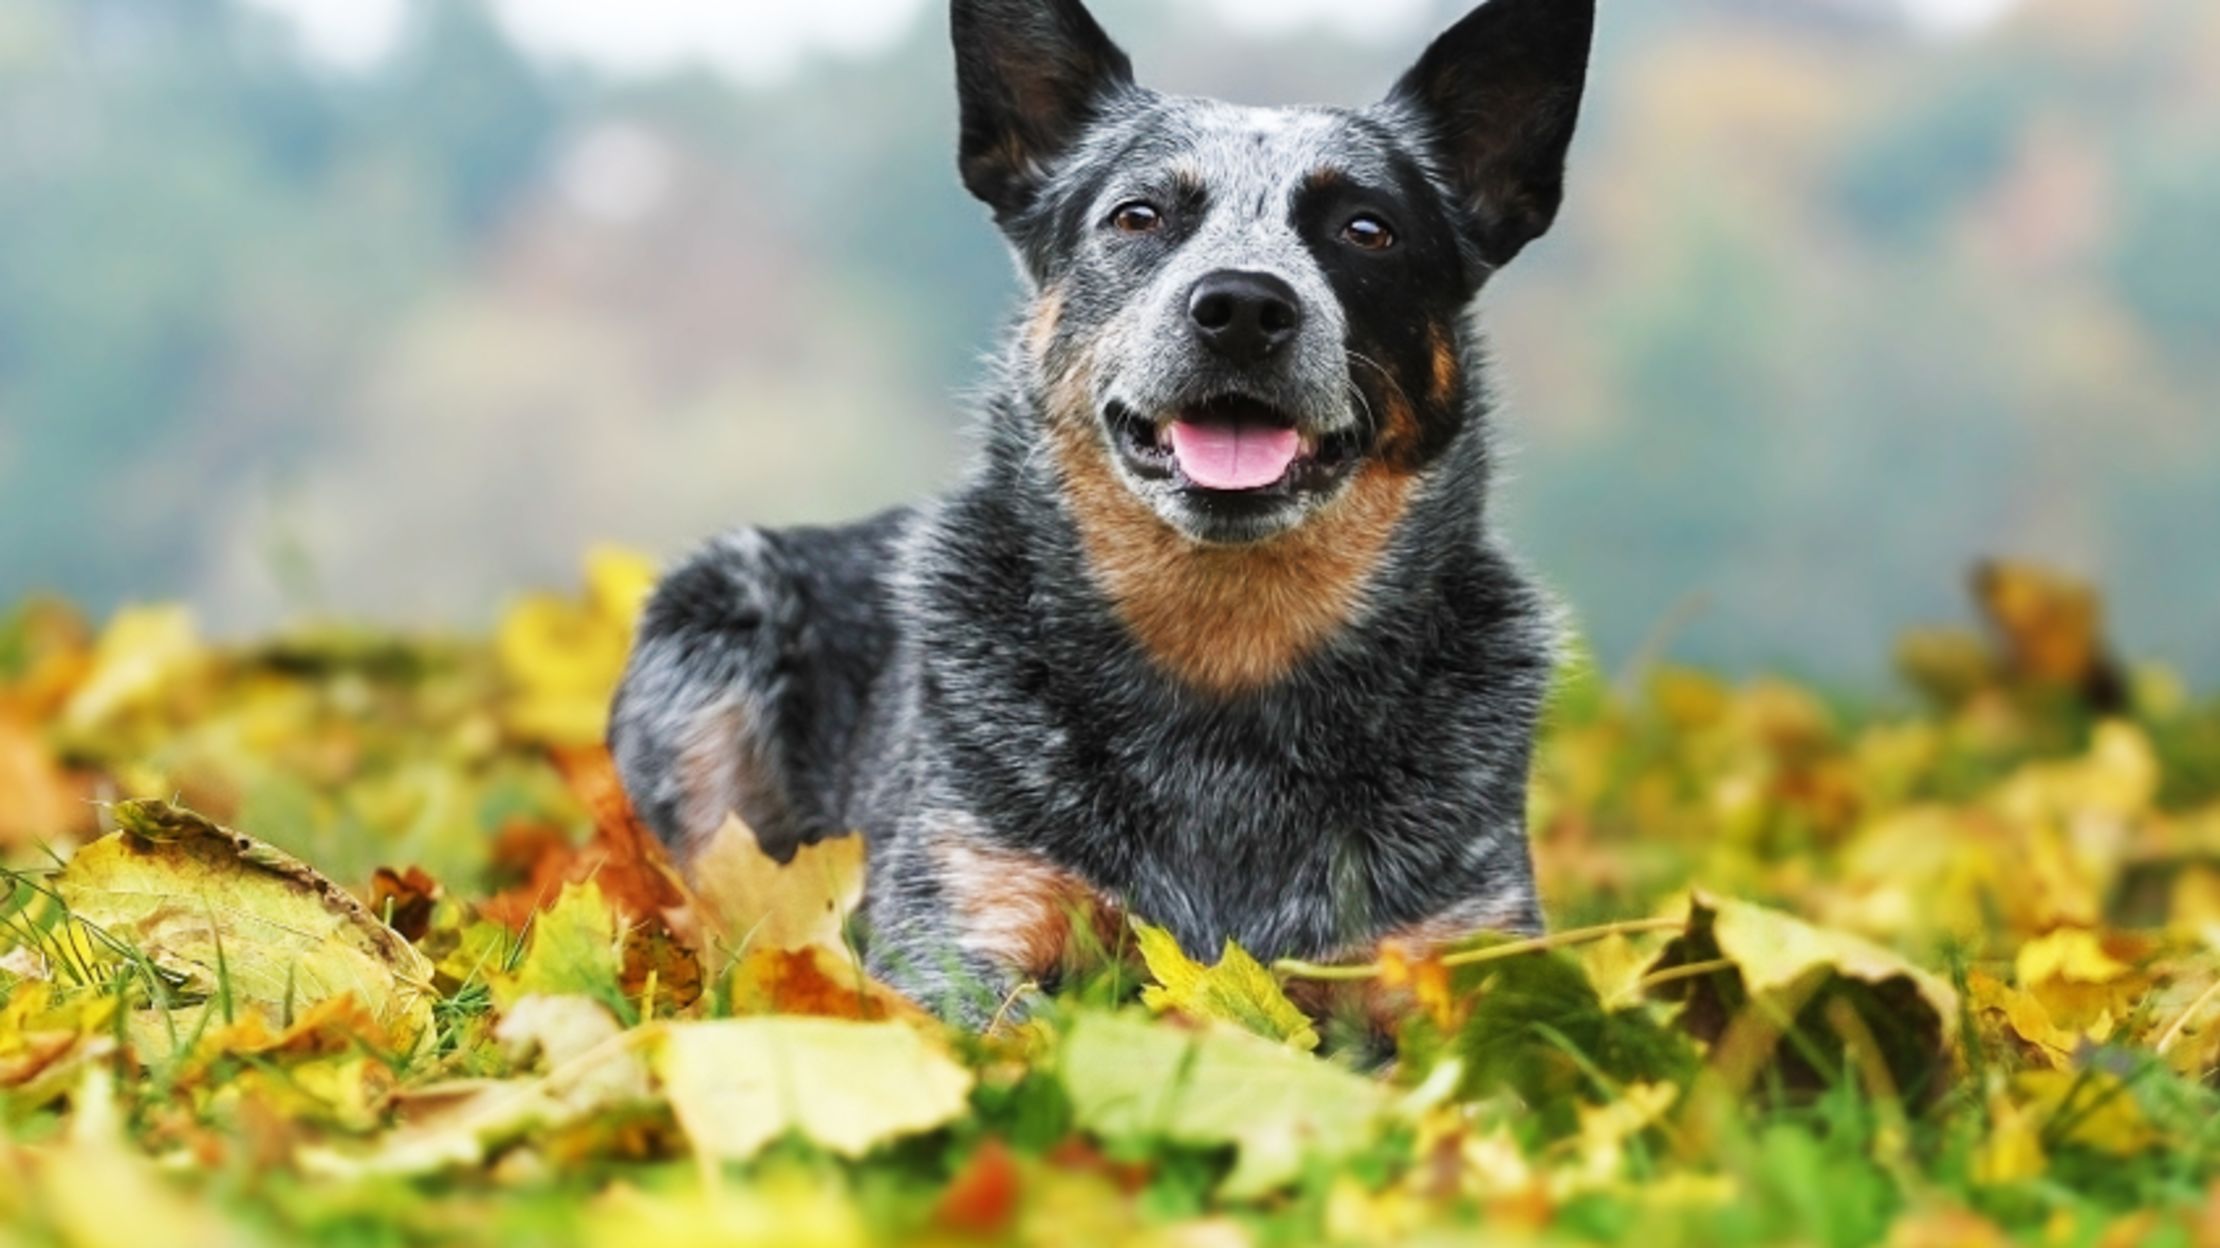 cattle dog nipping